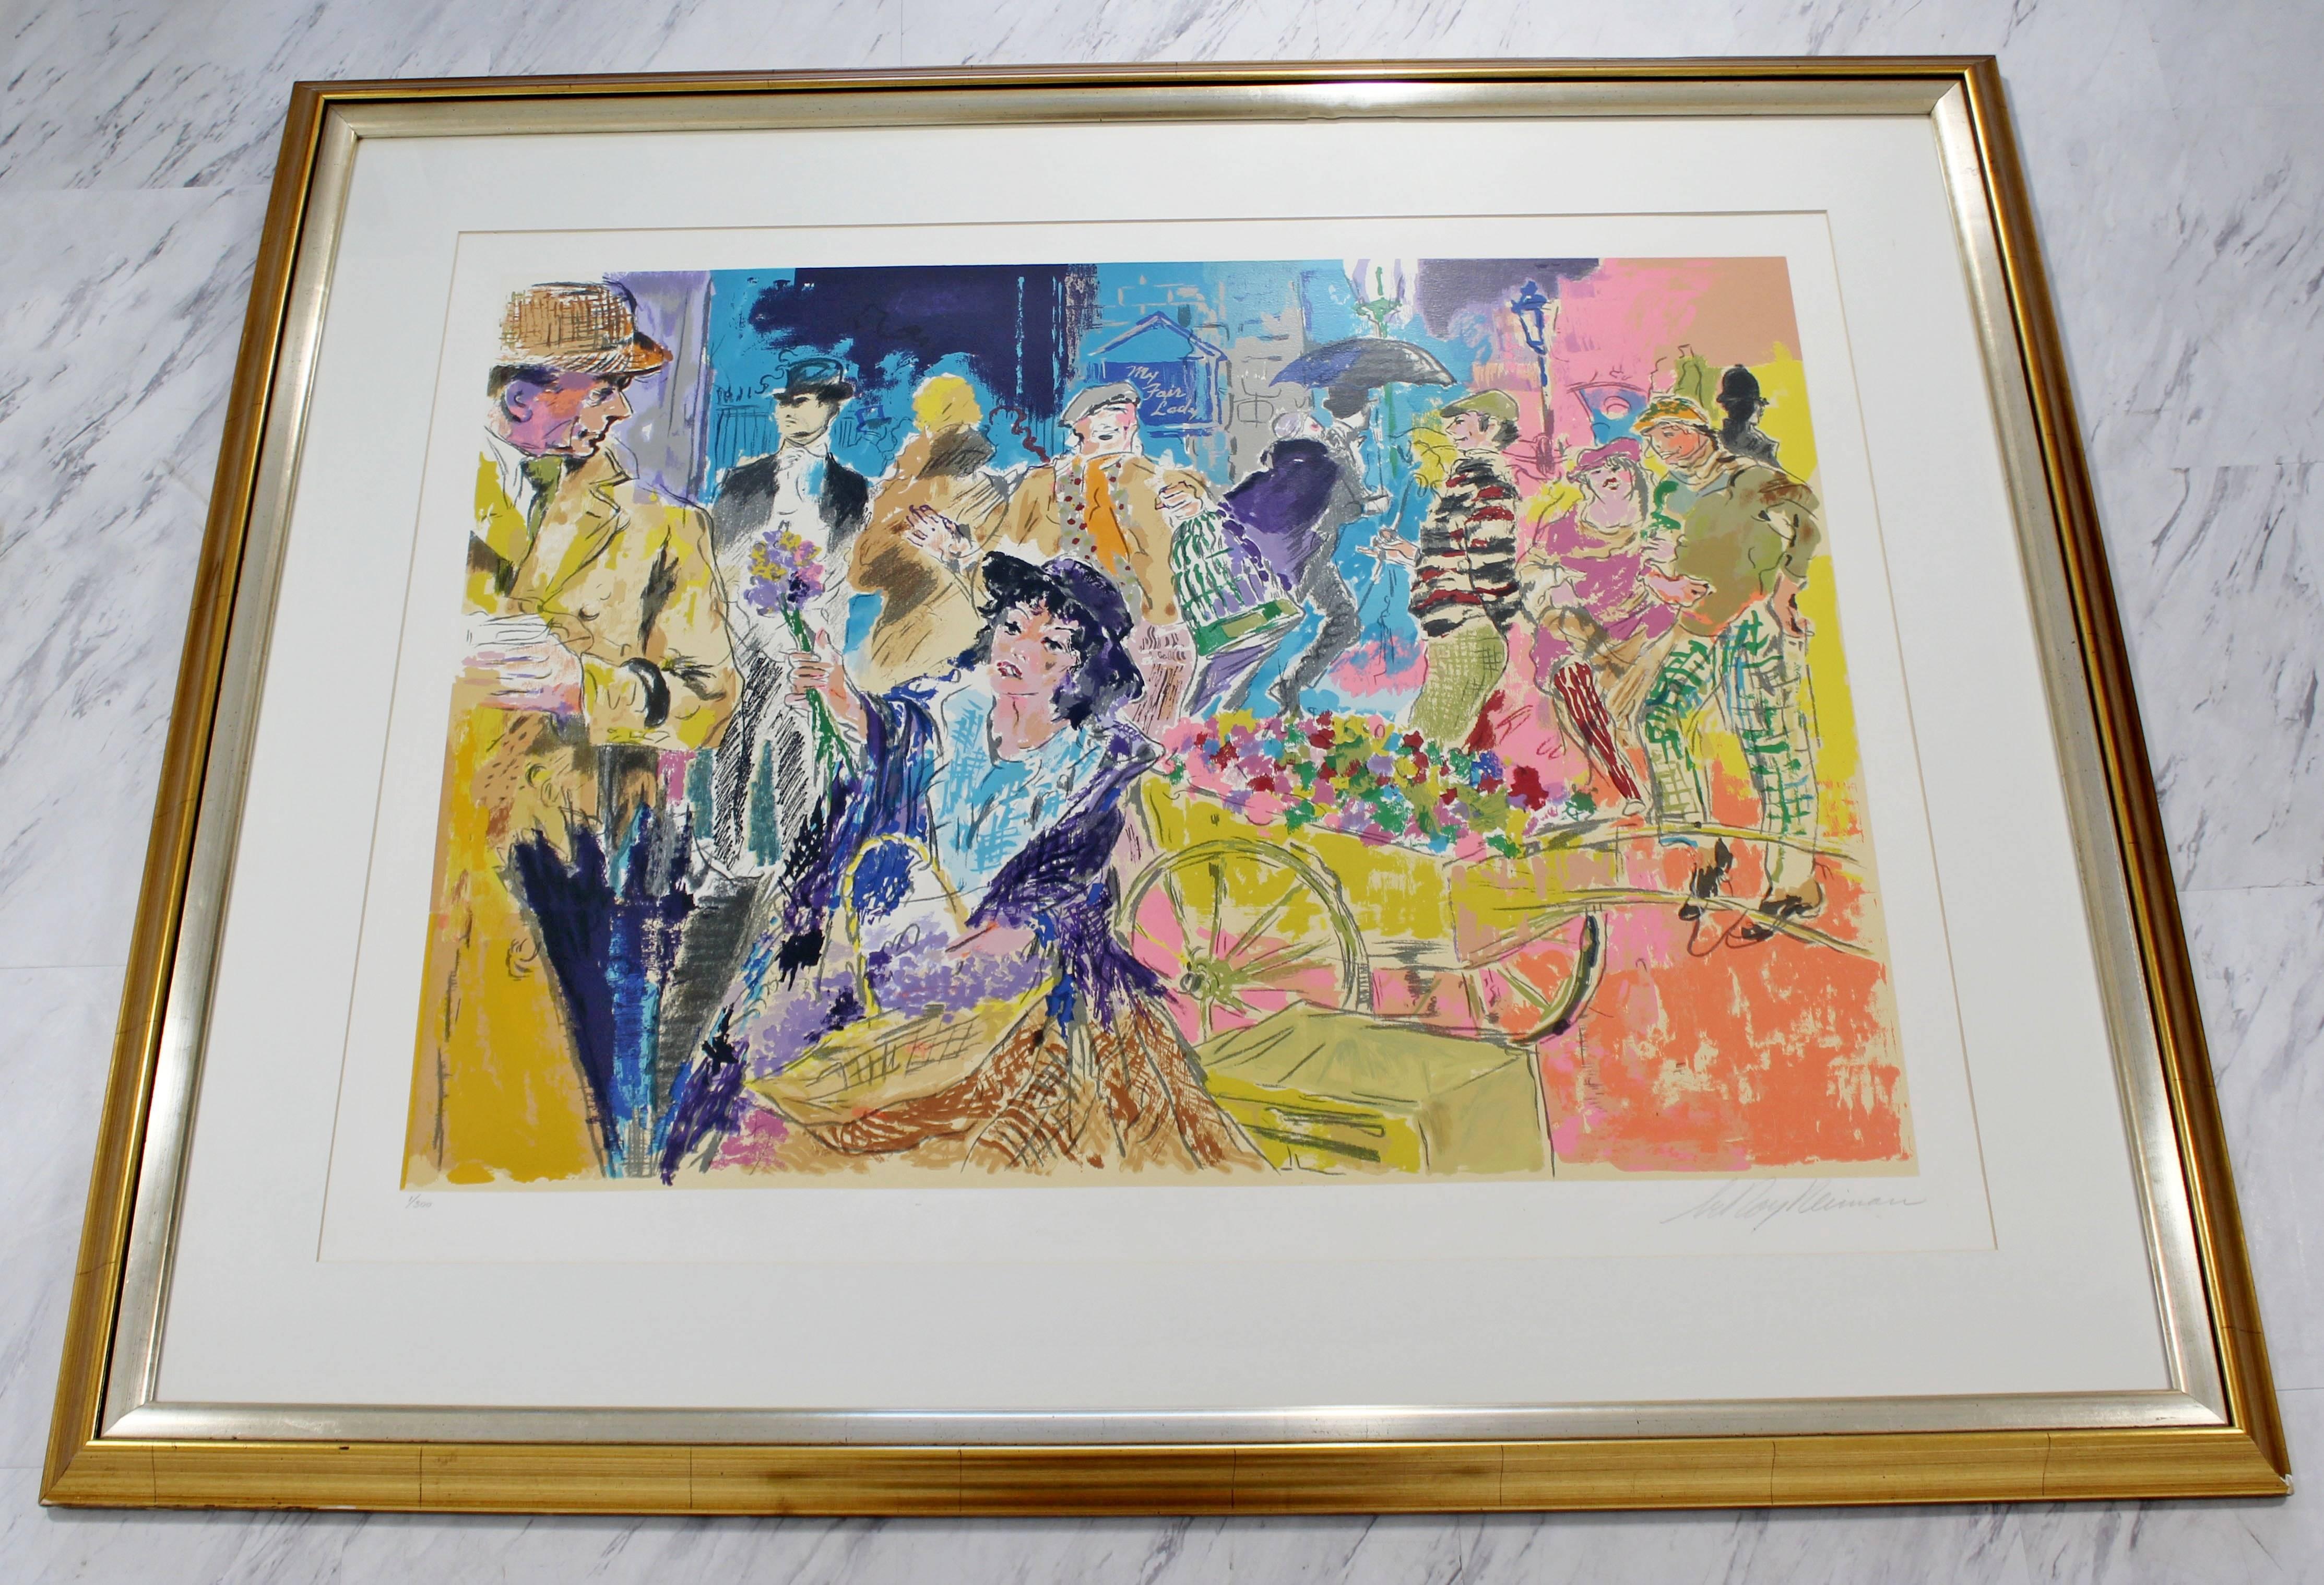 For your consideration is a Classic Leroy Neiman lithograph, 